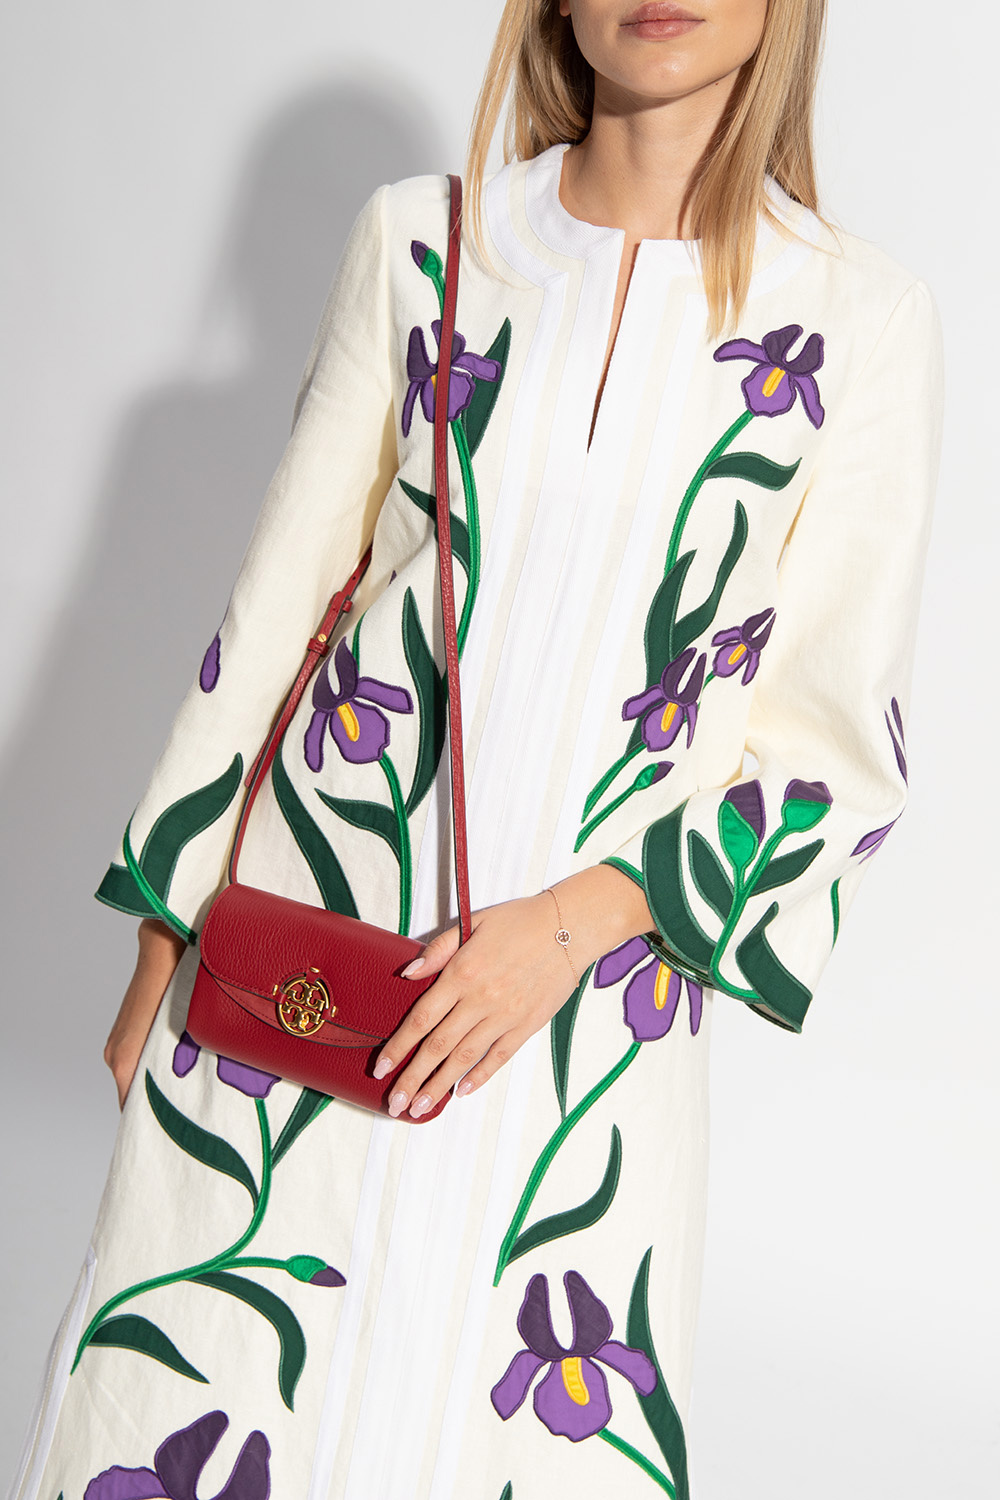 Tory Burch The MSN Bag is a perfect casual